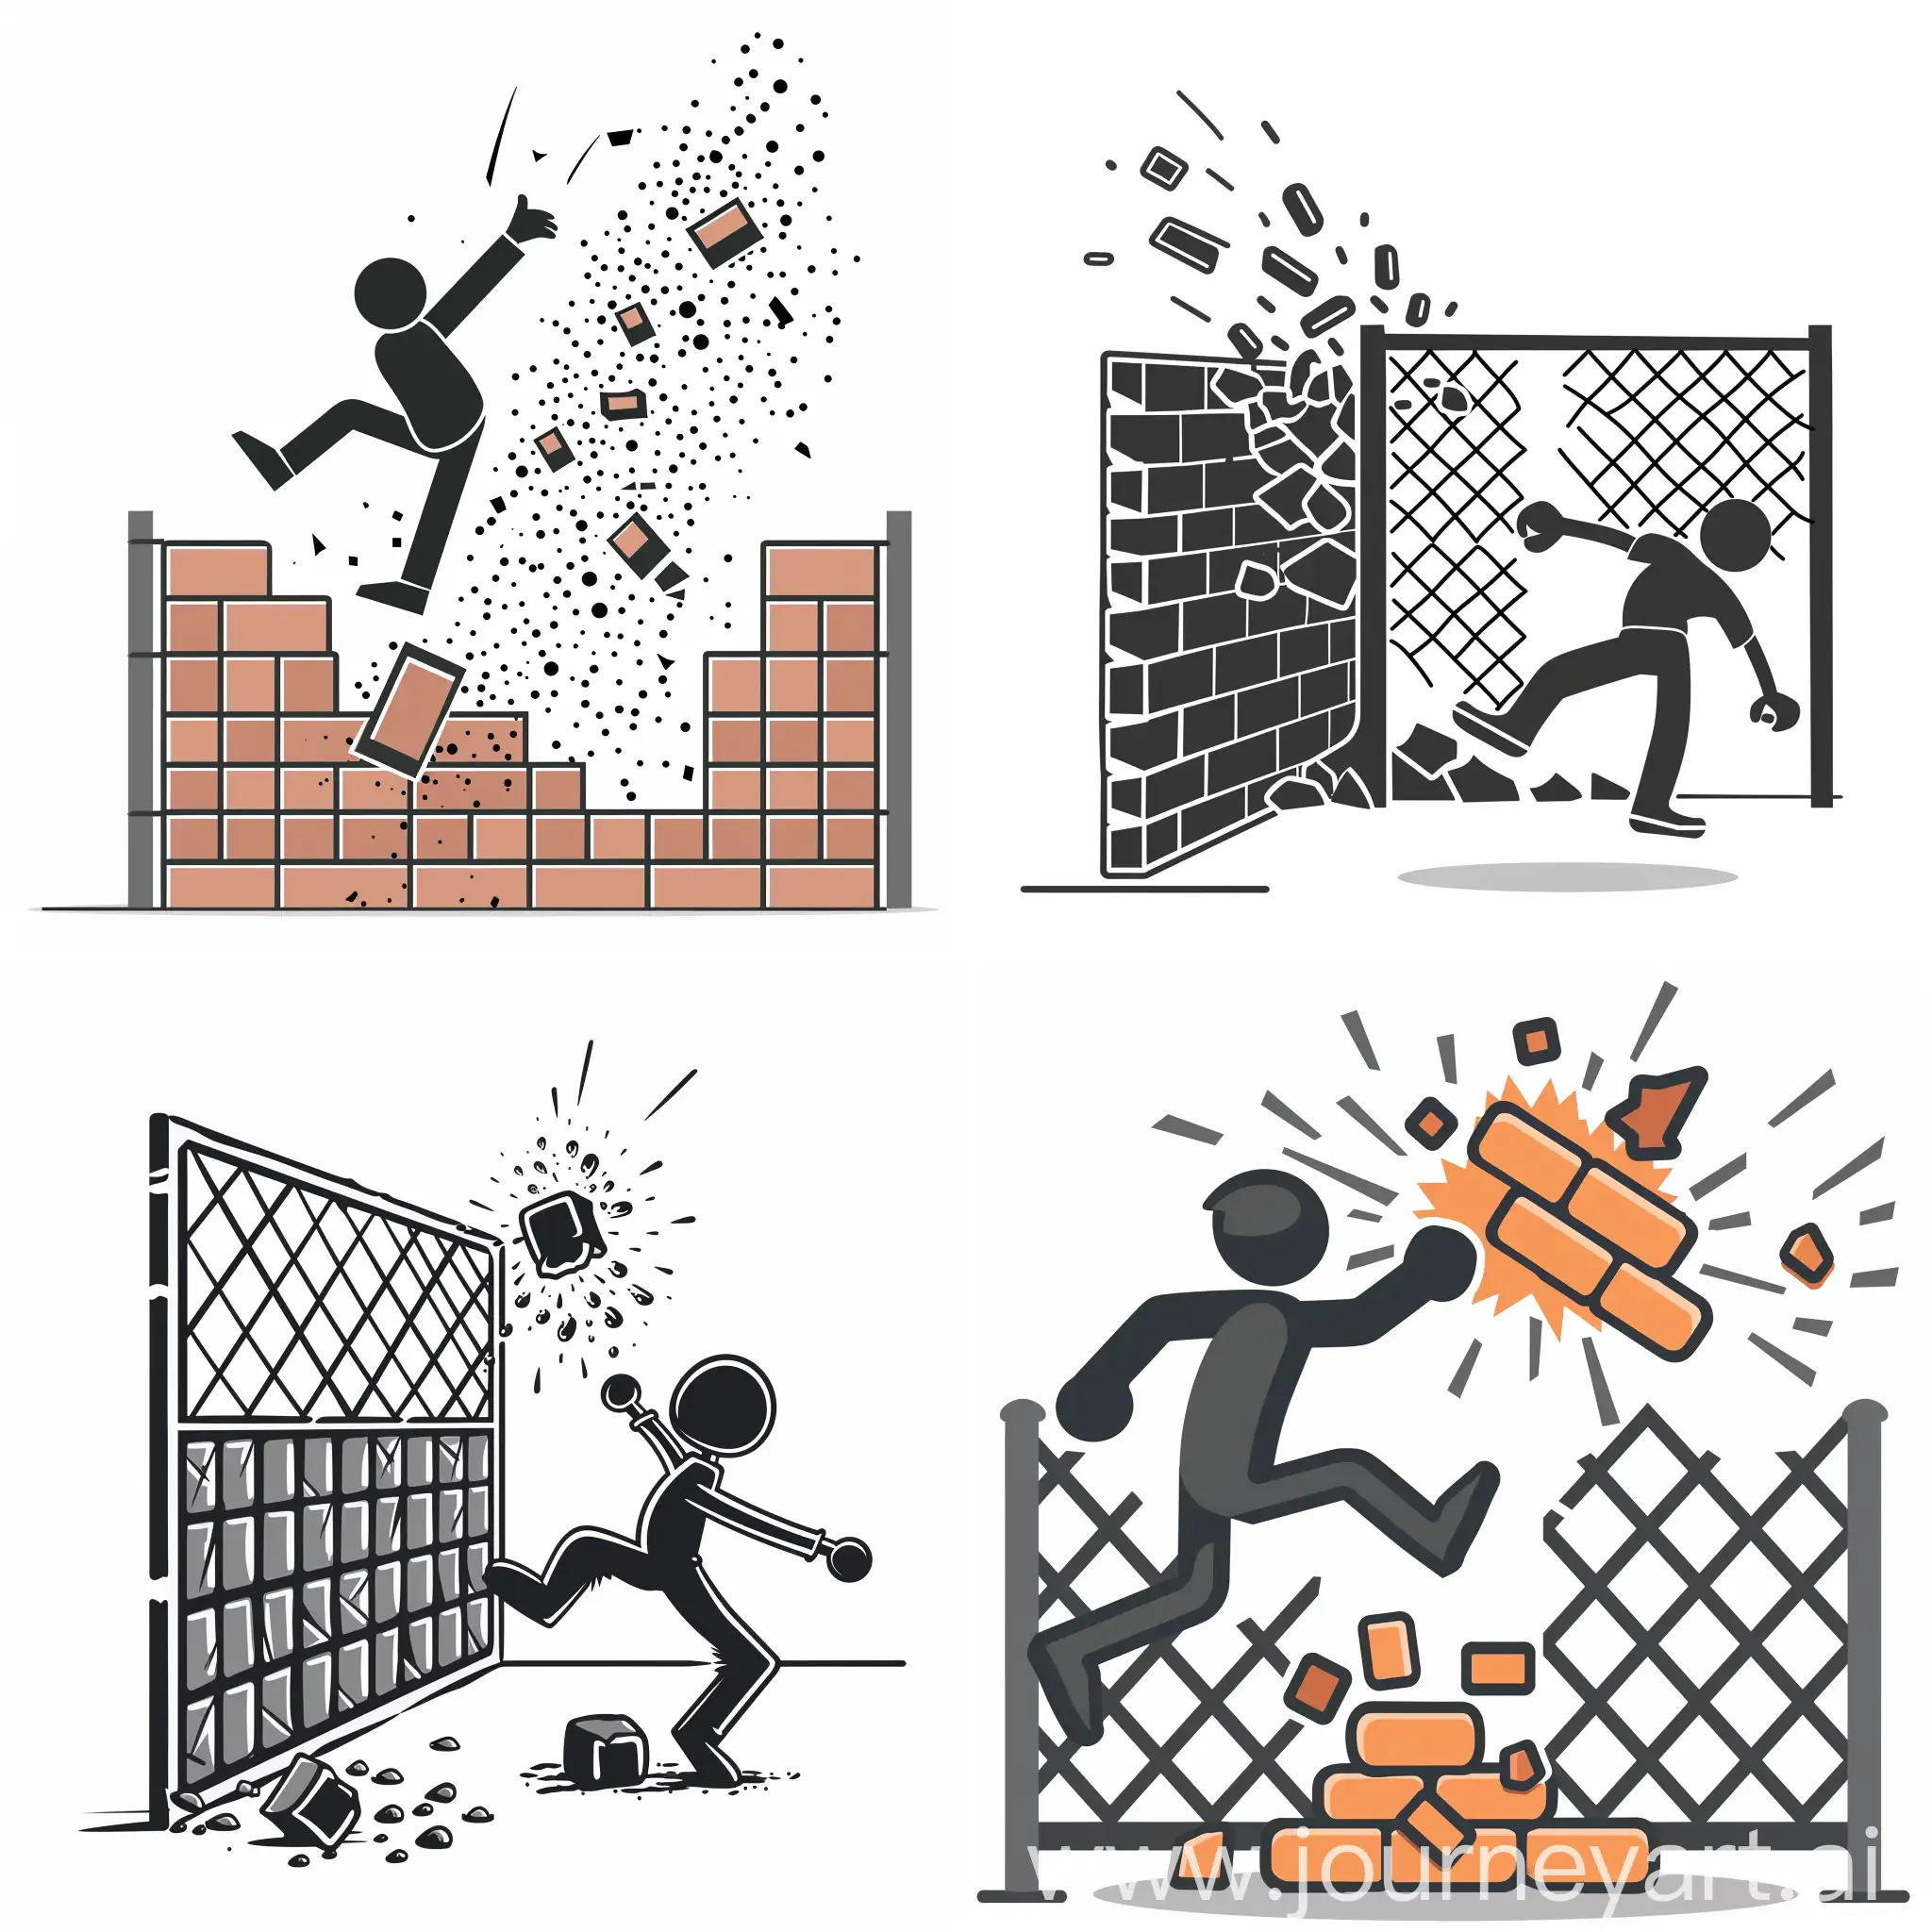 Stick Figures  Man and a Wall  Brick, kick, man, wall, destroy, fence, person icon